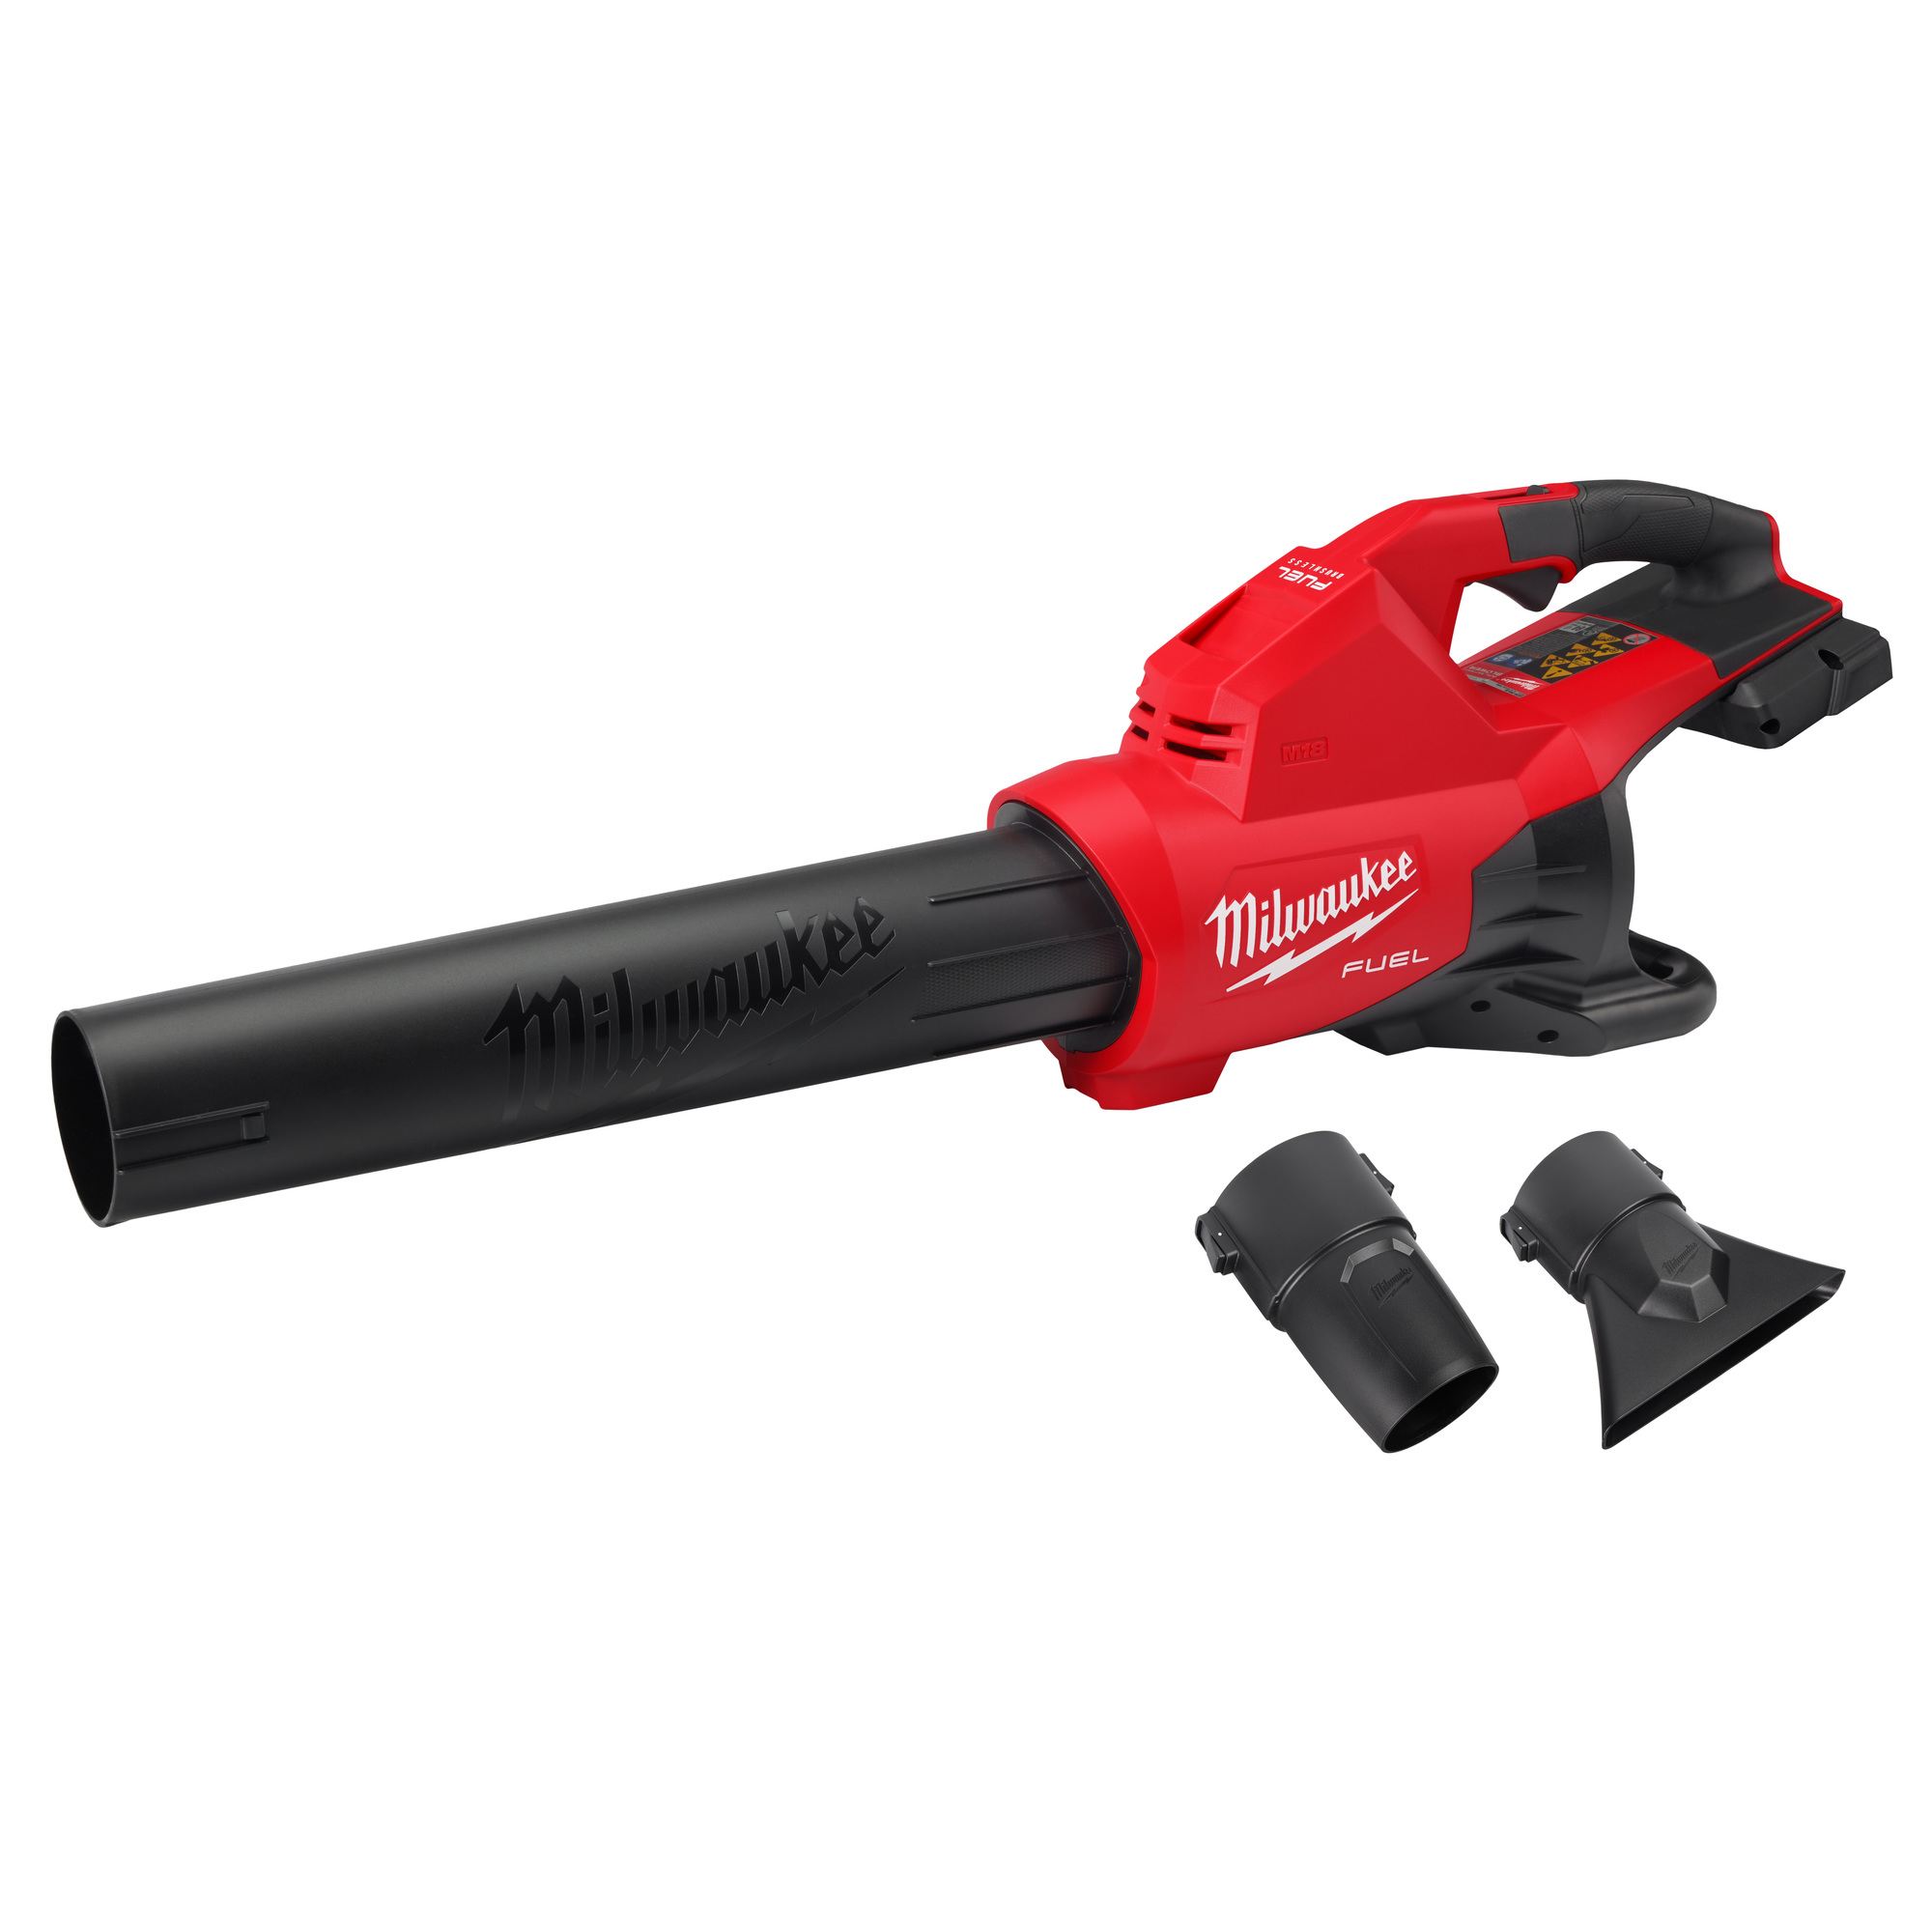 Milwaukee M18 Fuel Dual Battery Cordless Blower, 18V Lithium-Ion, Model 2824-20